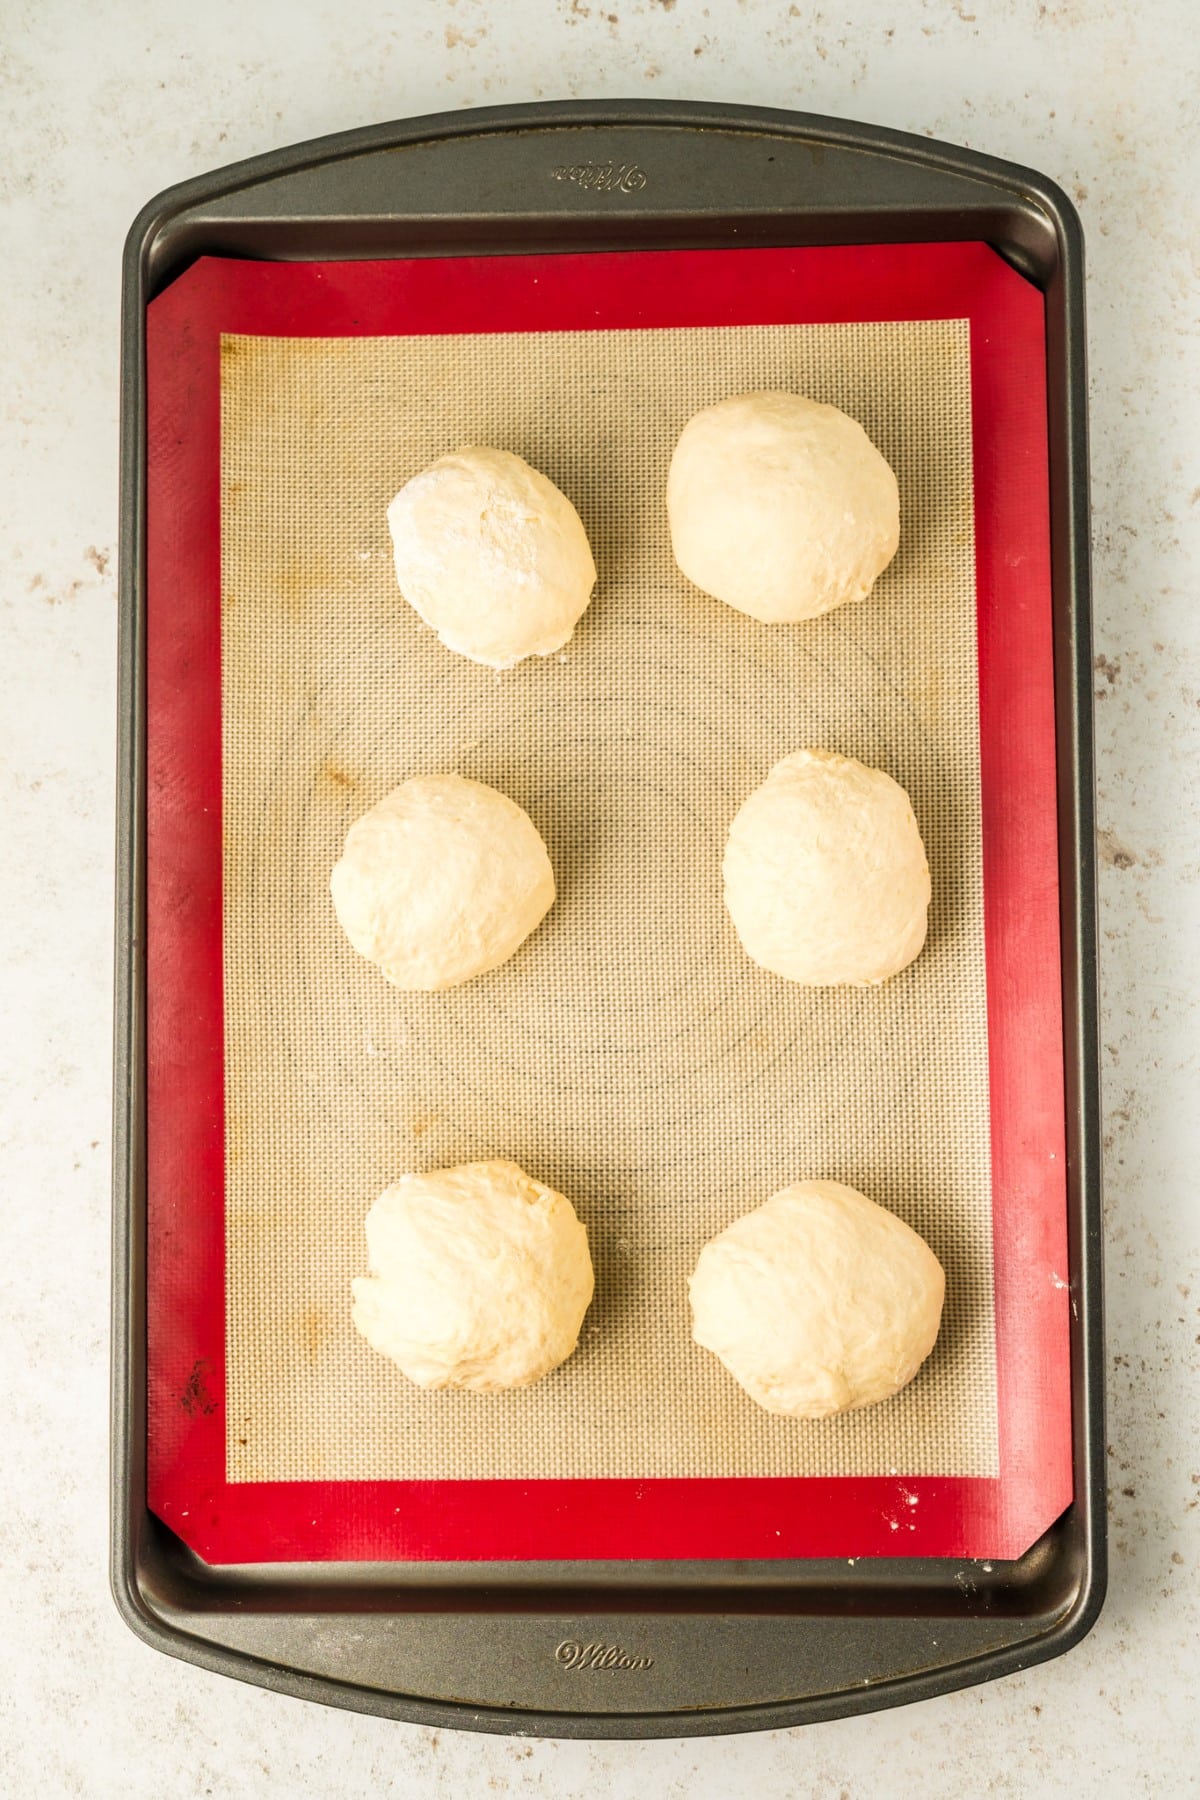 Naan rolled into 6 balls. 